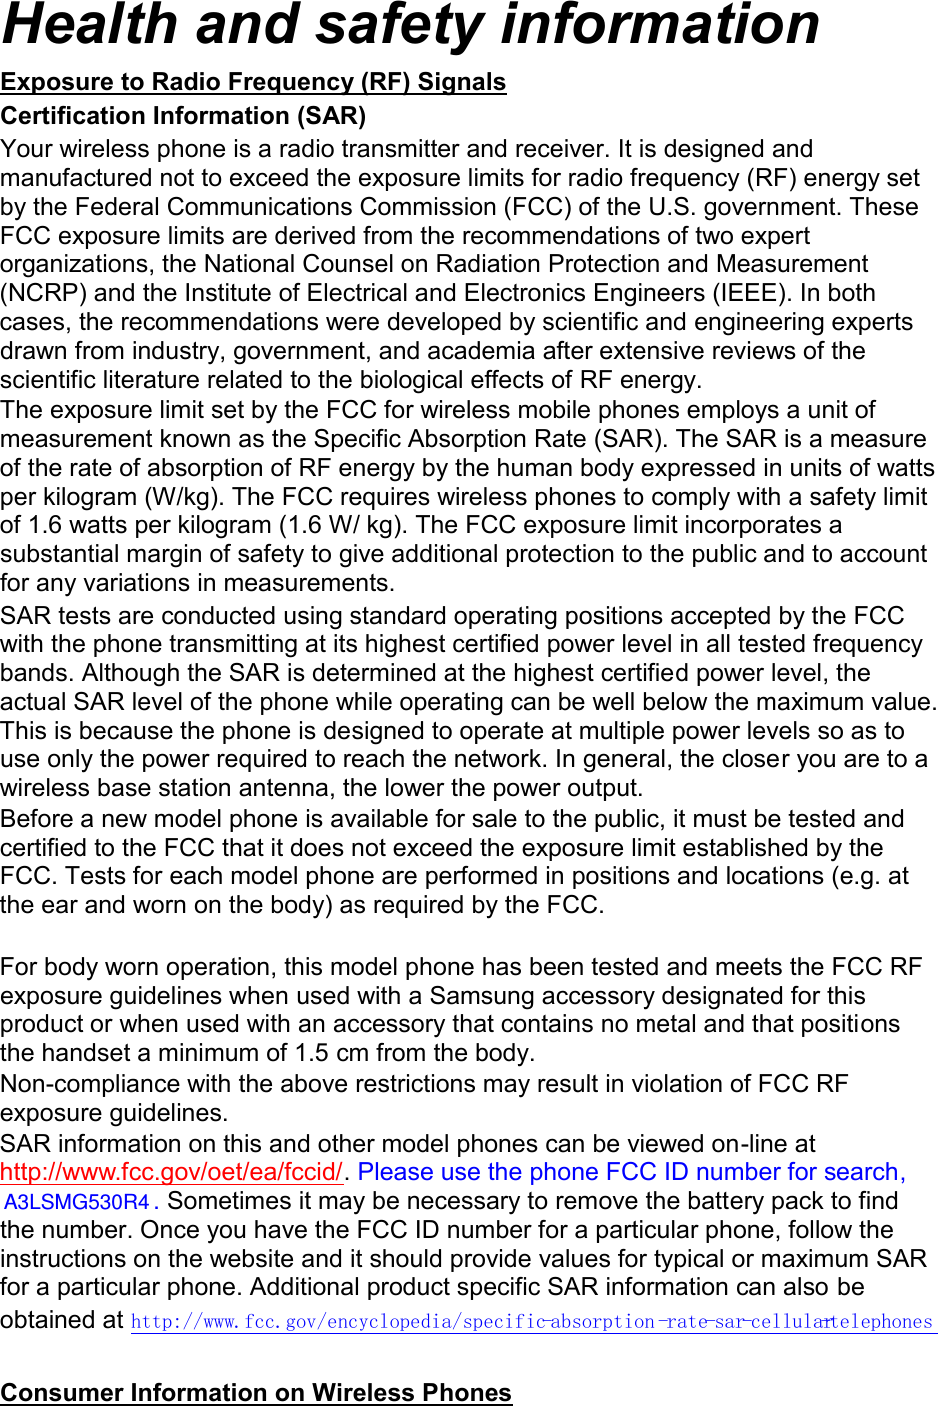 Health and safety information Exposure to Radio Frequency (RF) Signals Certification Information (SAR) Your wireless phone is a radio transmitter and receiver. It is designed and manufactured not to exceed the exposure limits for radio frequency (RF) energy set by the Federal Communications Commission (FCC) of the U.S. government. These FCC exposure limits are derived from the recommendations of two expert organizations, the National Counsel on Radiation Protection and Measurement (NCRP) and the Institute of Electrical and Electronics Engineers (IEEE). In both cases, the recommendations were developed by scientific and engineering experts drawn from industry, government, and academia after extensive reviews of the scientific literature related to the biological effects of RF energy. The exposure limit set by the FCC for wireless mobile phones employs a unit of measurement known as the Specific Absorption Rate (SAR). The SAR is a measure of the rate of absorption of RF energy by the human body expressed in units of watts per kilogram (W/kg). The FCC requires wireless phones to comply with a safety limit of 1.6 watts per kilogram (1.6 W/ kg). The FCC exposure limit incorporates a substantial margin of safety to give additional protection to the public and to account for any variations in measurements. SAR tests are conducted using standard operating positions accepted by the FCC with the phone transmitting at its highest certified power level in all tested frequency bands. Although the SAR is determined at the highest certified power level, the actual SAR level of the phone while operating can be well below the maximum value. This is because the phone is designed to operate at multiple power levels so as to use only the power required to reach the network. In general, the closer you are to a wireless base station antenna, the lower the power output. Before a new model phone is available for sale to the public, it must be tested and certified to the FCC that it does not exceed the exposure limit established by the FCC. Tests for each model phone are performed in positions and locations (e.g. at the ear and worn on the body) as required by the FCC.      For body worn operation, this model phone has been tested and meets the FCC RF exposure guidelines when used with a Samsung accessory designated for this product or when used with an accessory that contains no metal and that positions the handset a minimum of 1.5 cm from the body.   Non-compliance with the above restrictions may result in violation of FCC RF exposure guidelines. SAR information on this and other model phones can be viewed on-line at http://www.fcc.gov/oet/ea/fccid/. Please use the phone FCC ID number for search, . Sometimes it may be necessary to remove the battery pack to find the number. Once you have the FCC ID number for a particular phone, follow the instructions on the website and it should provide values for typical or maximum SAR for a particular phone. Additional product specific SAR information can also be obtained at http://www.fcc.gov/encyclopedia/specific-absorption -rate-sar-cellular-telephones   Consumer Information on Wireless Phones A3LSMG530R4